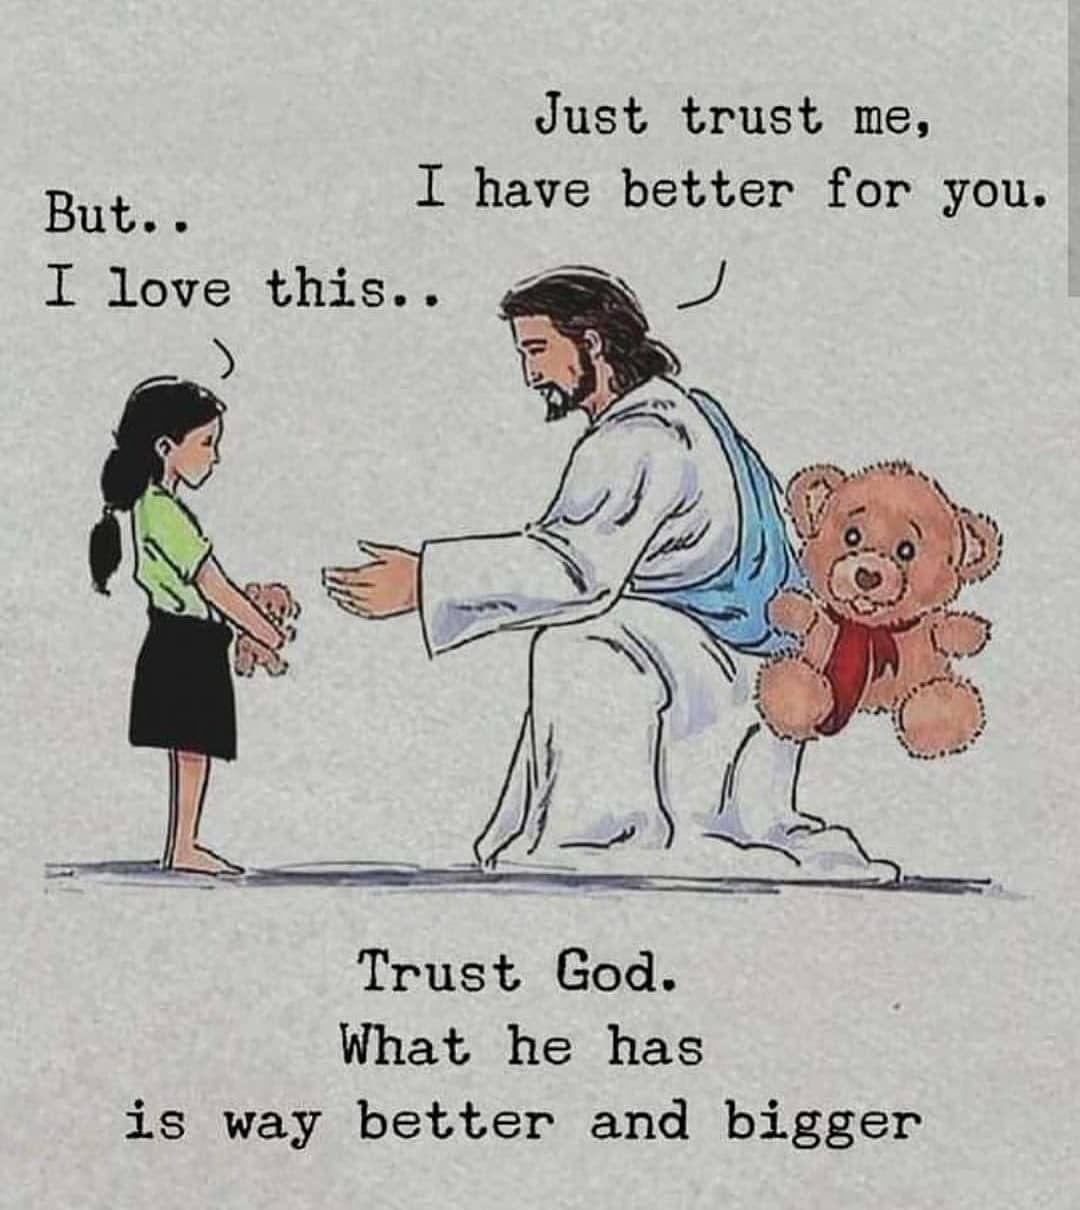 But... I love this... Just trust me, I have better for you. Trust God. What he has is way better and bigger.